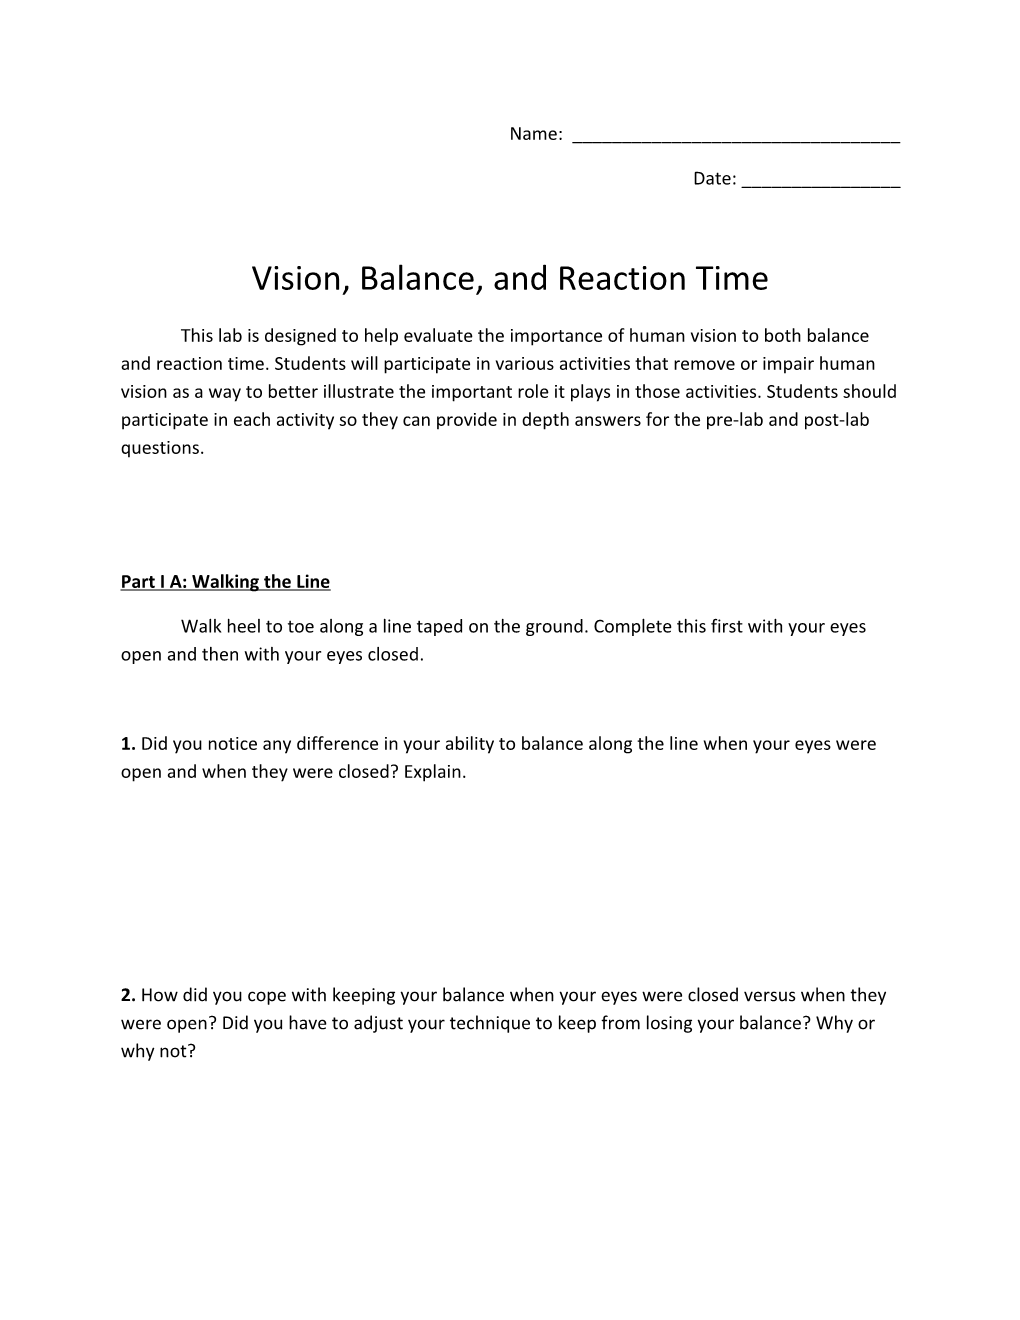 Vision, Balance, and Reaction Time